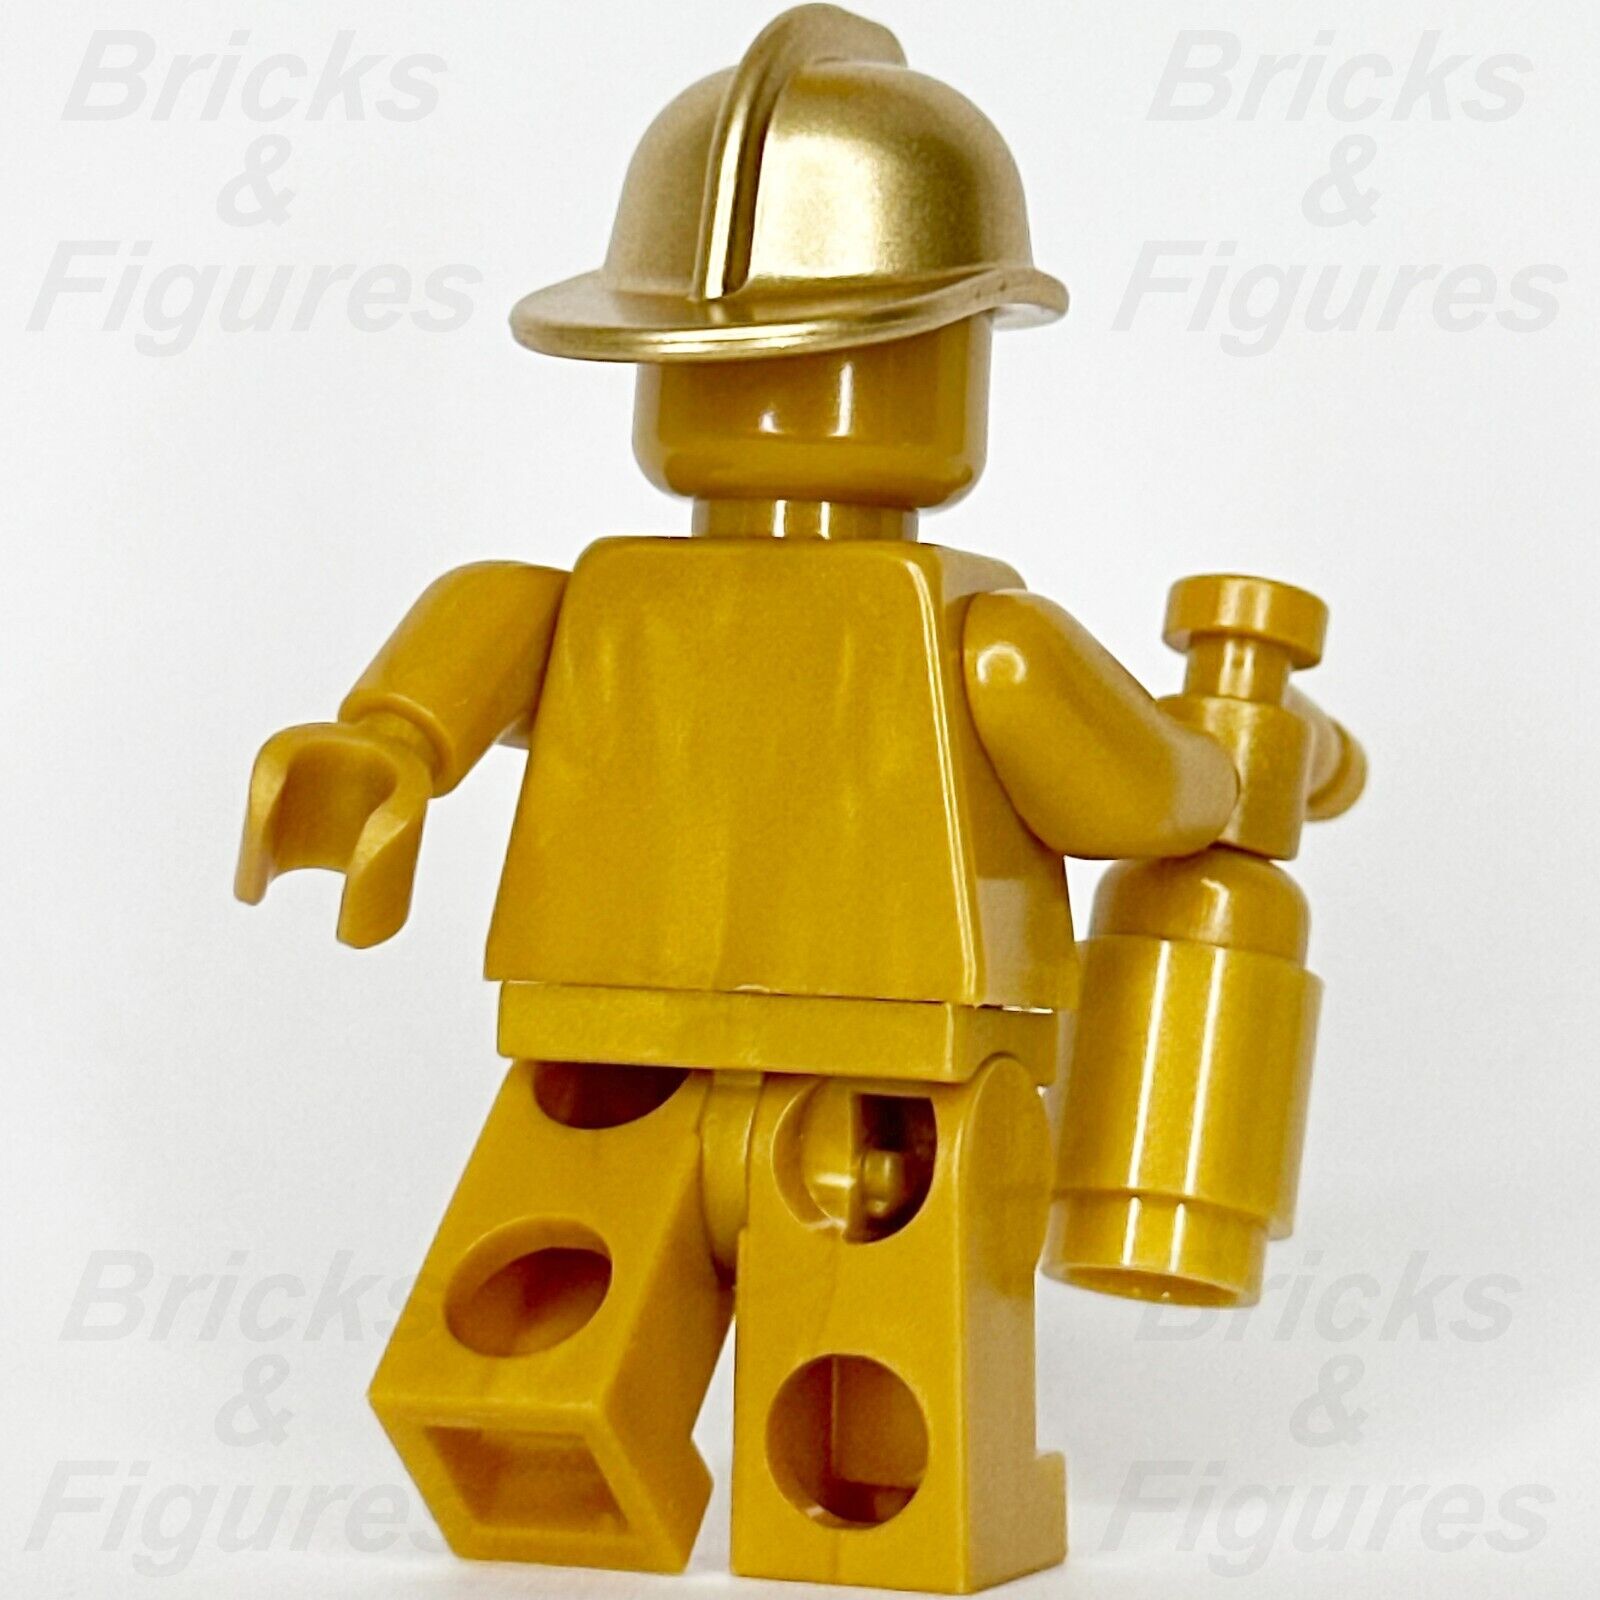 LEGO City Firefighter Gold Statue Minifigure Town Police 60207 cty0989 Fireman